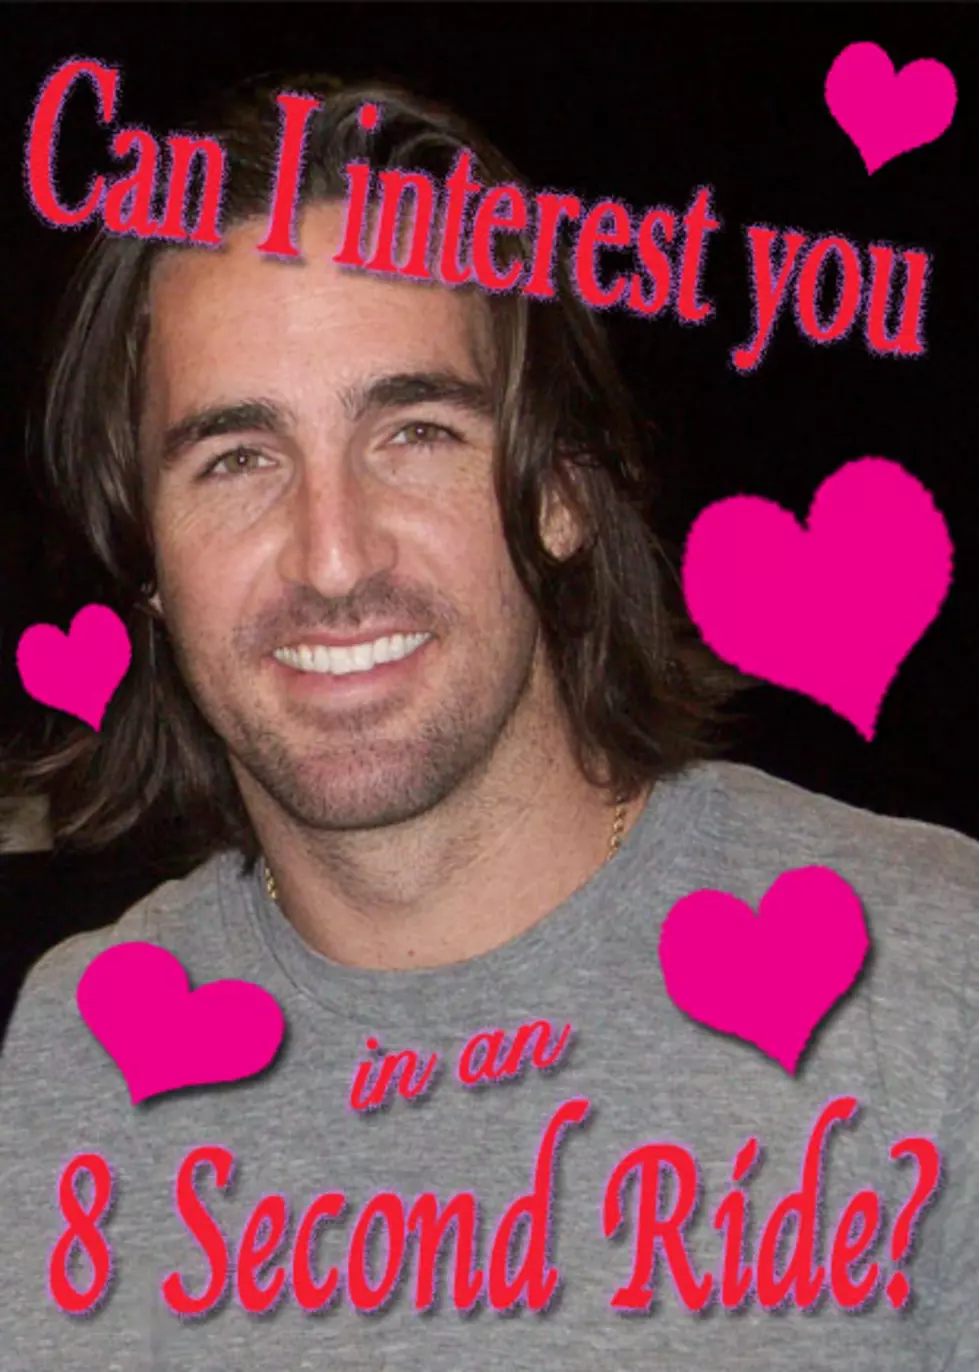 Check Out Check Out Jake Owen’s Valentine’s Day Card